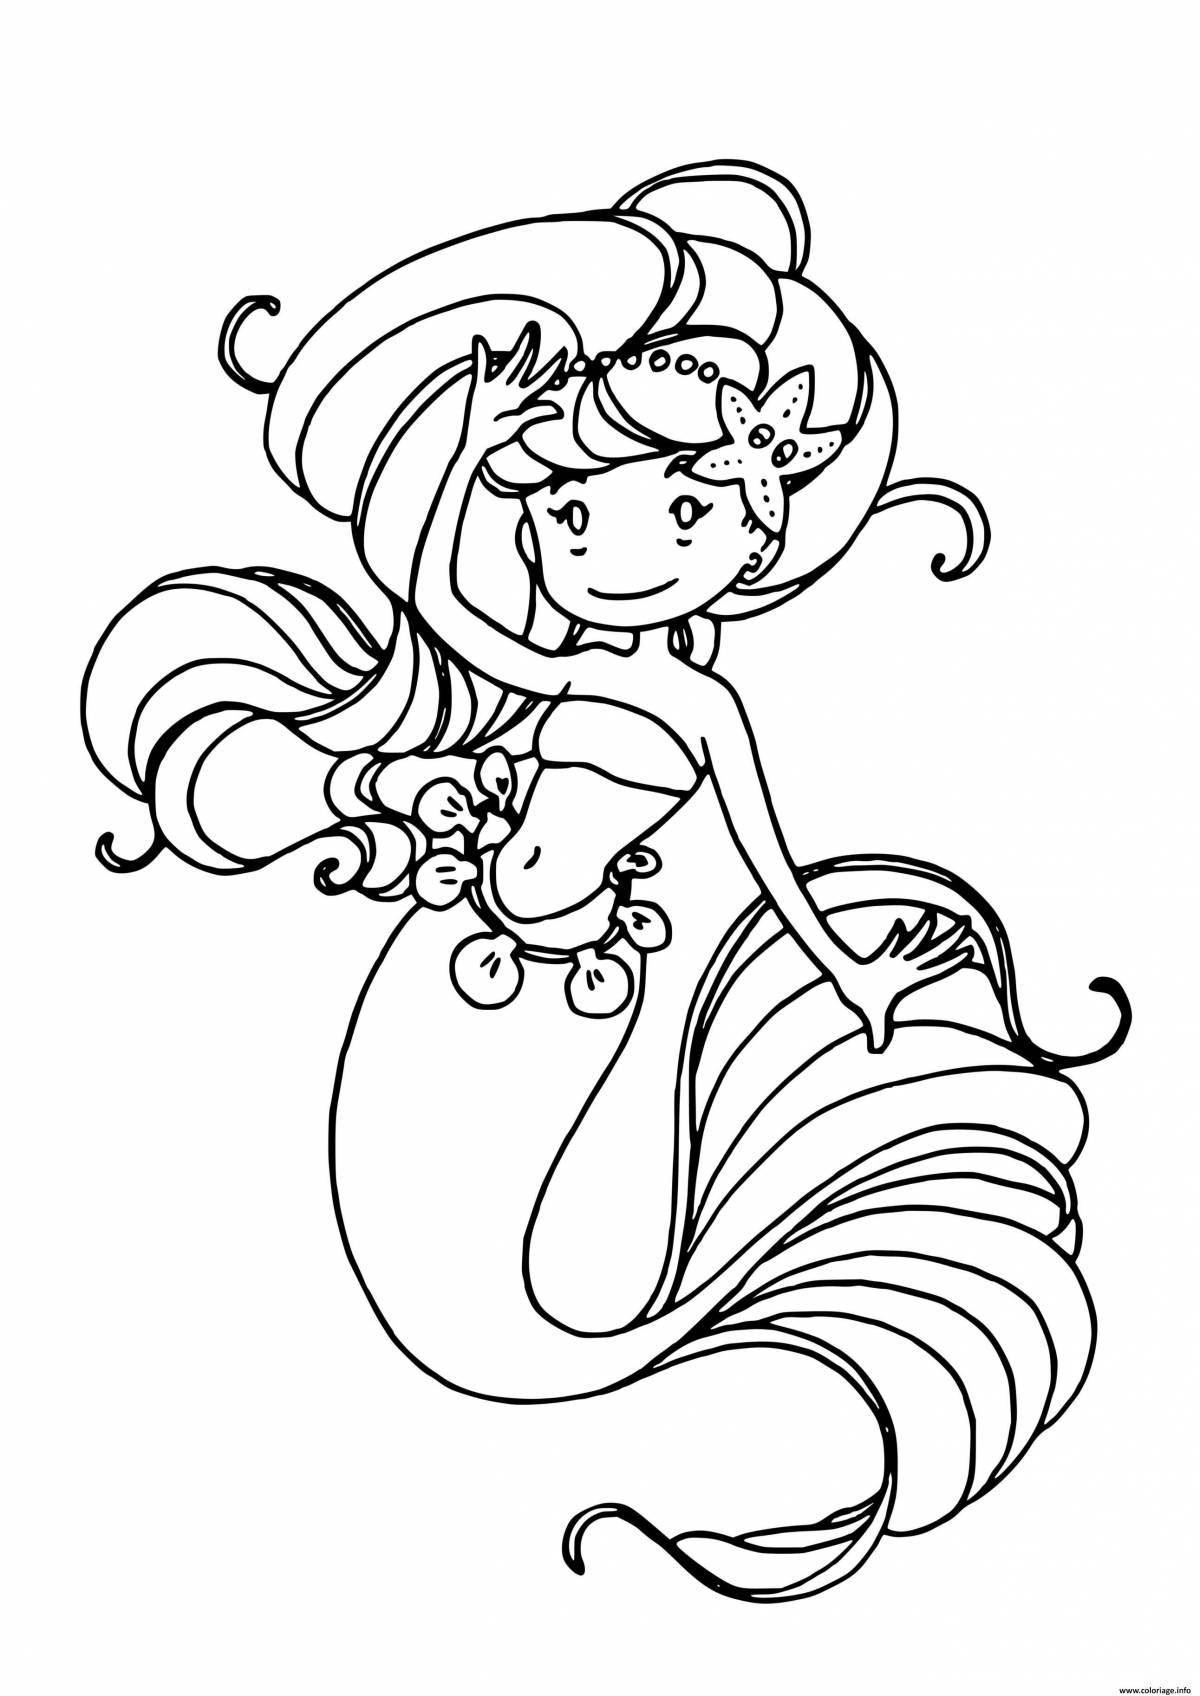 Fabulous gray head coloring page for kids